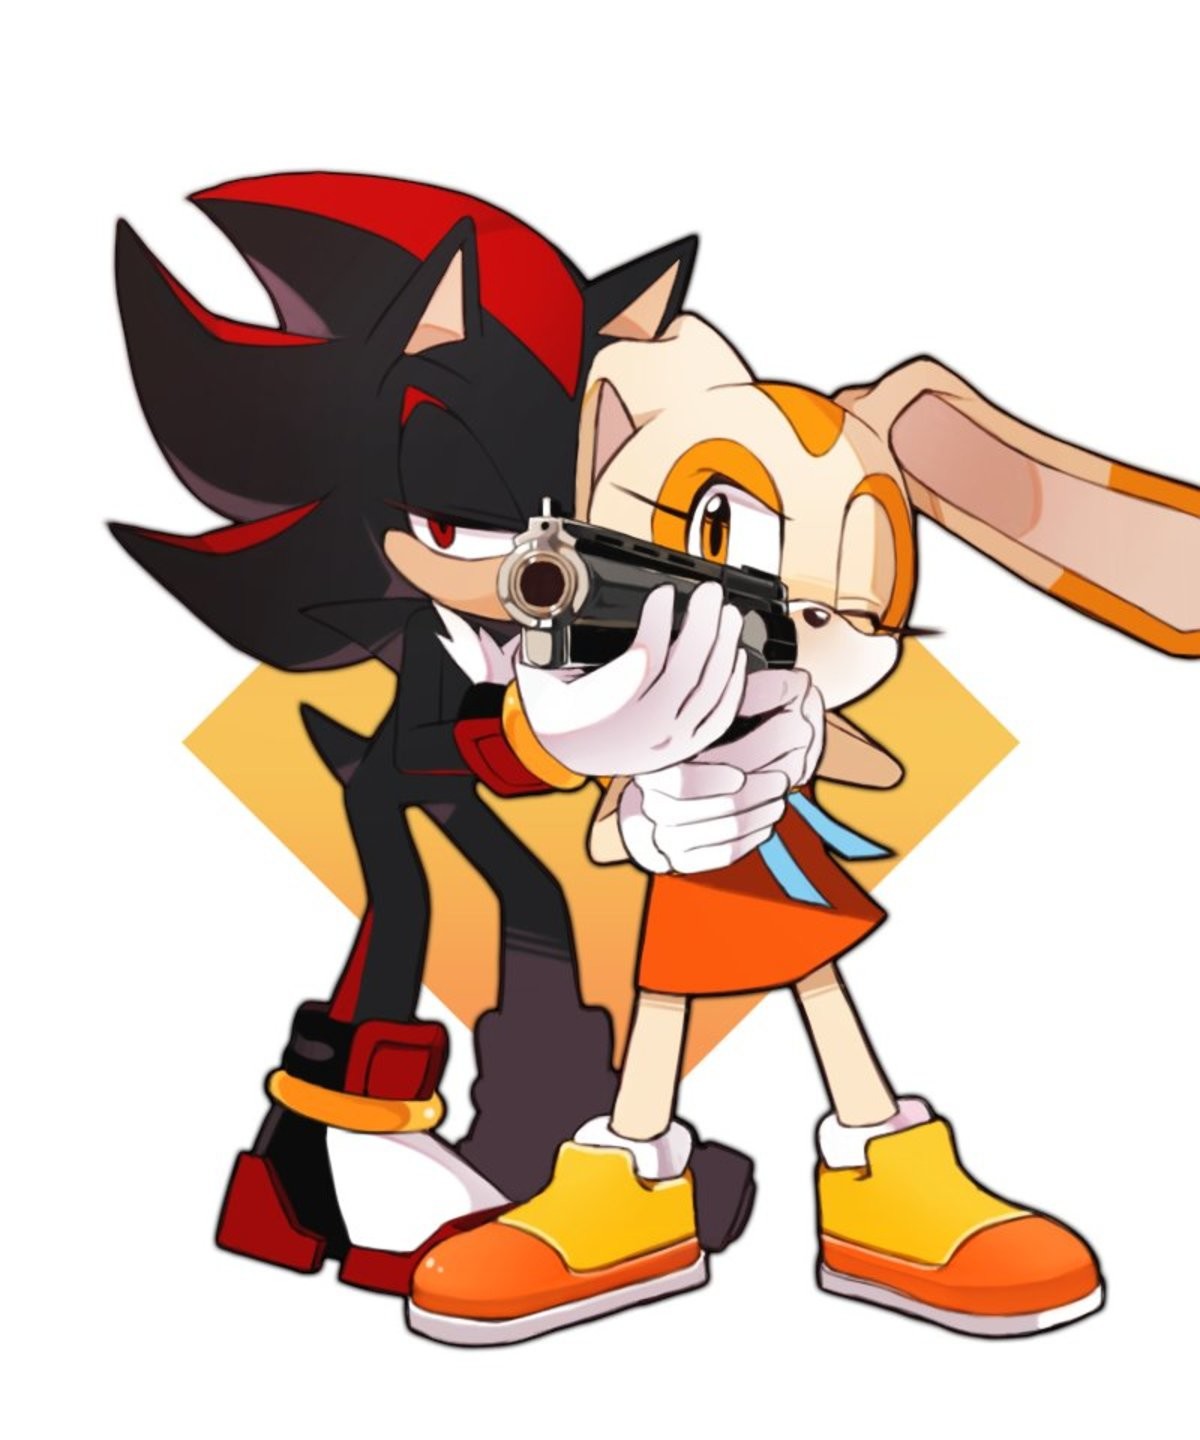 At Range. .. Oh for sake, another sonic channel!? This is why we have the list! As for the content, shadow is just being a good baby sitter, I see nothing wrong here [trigge